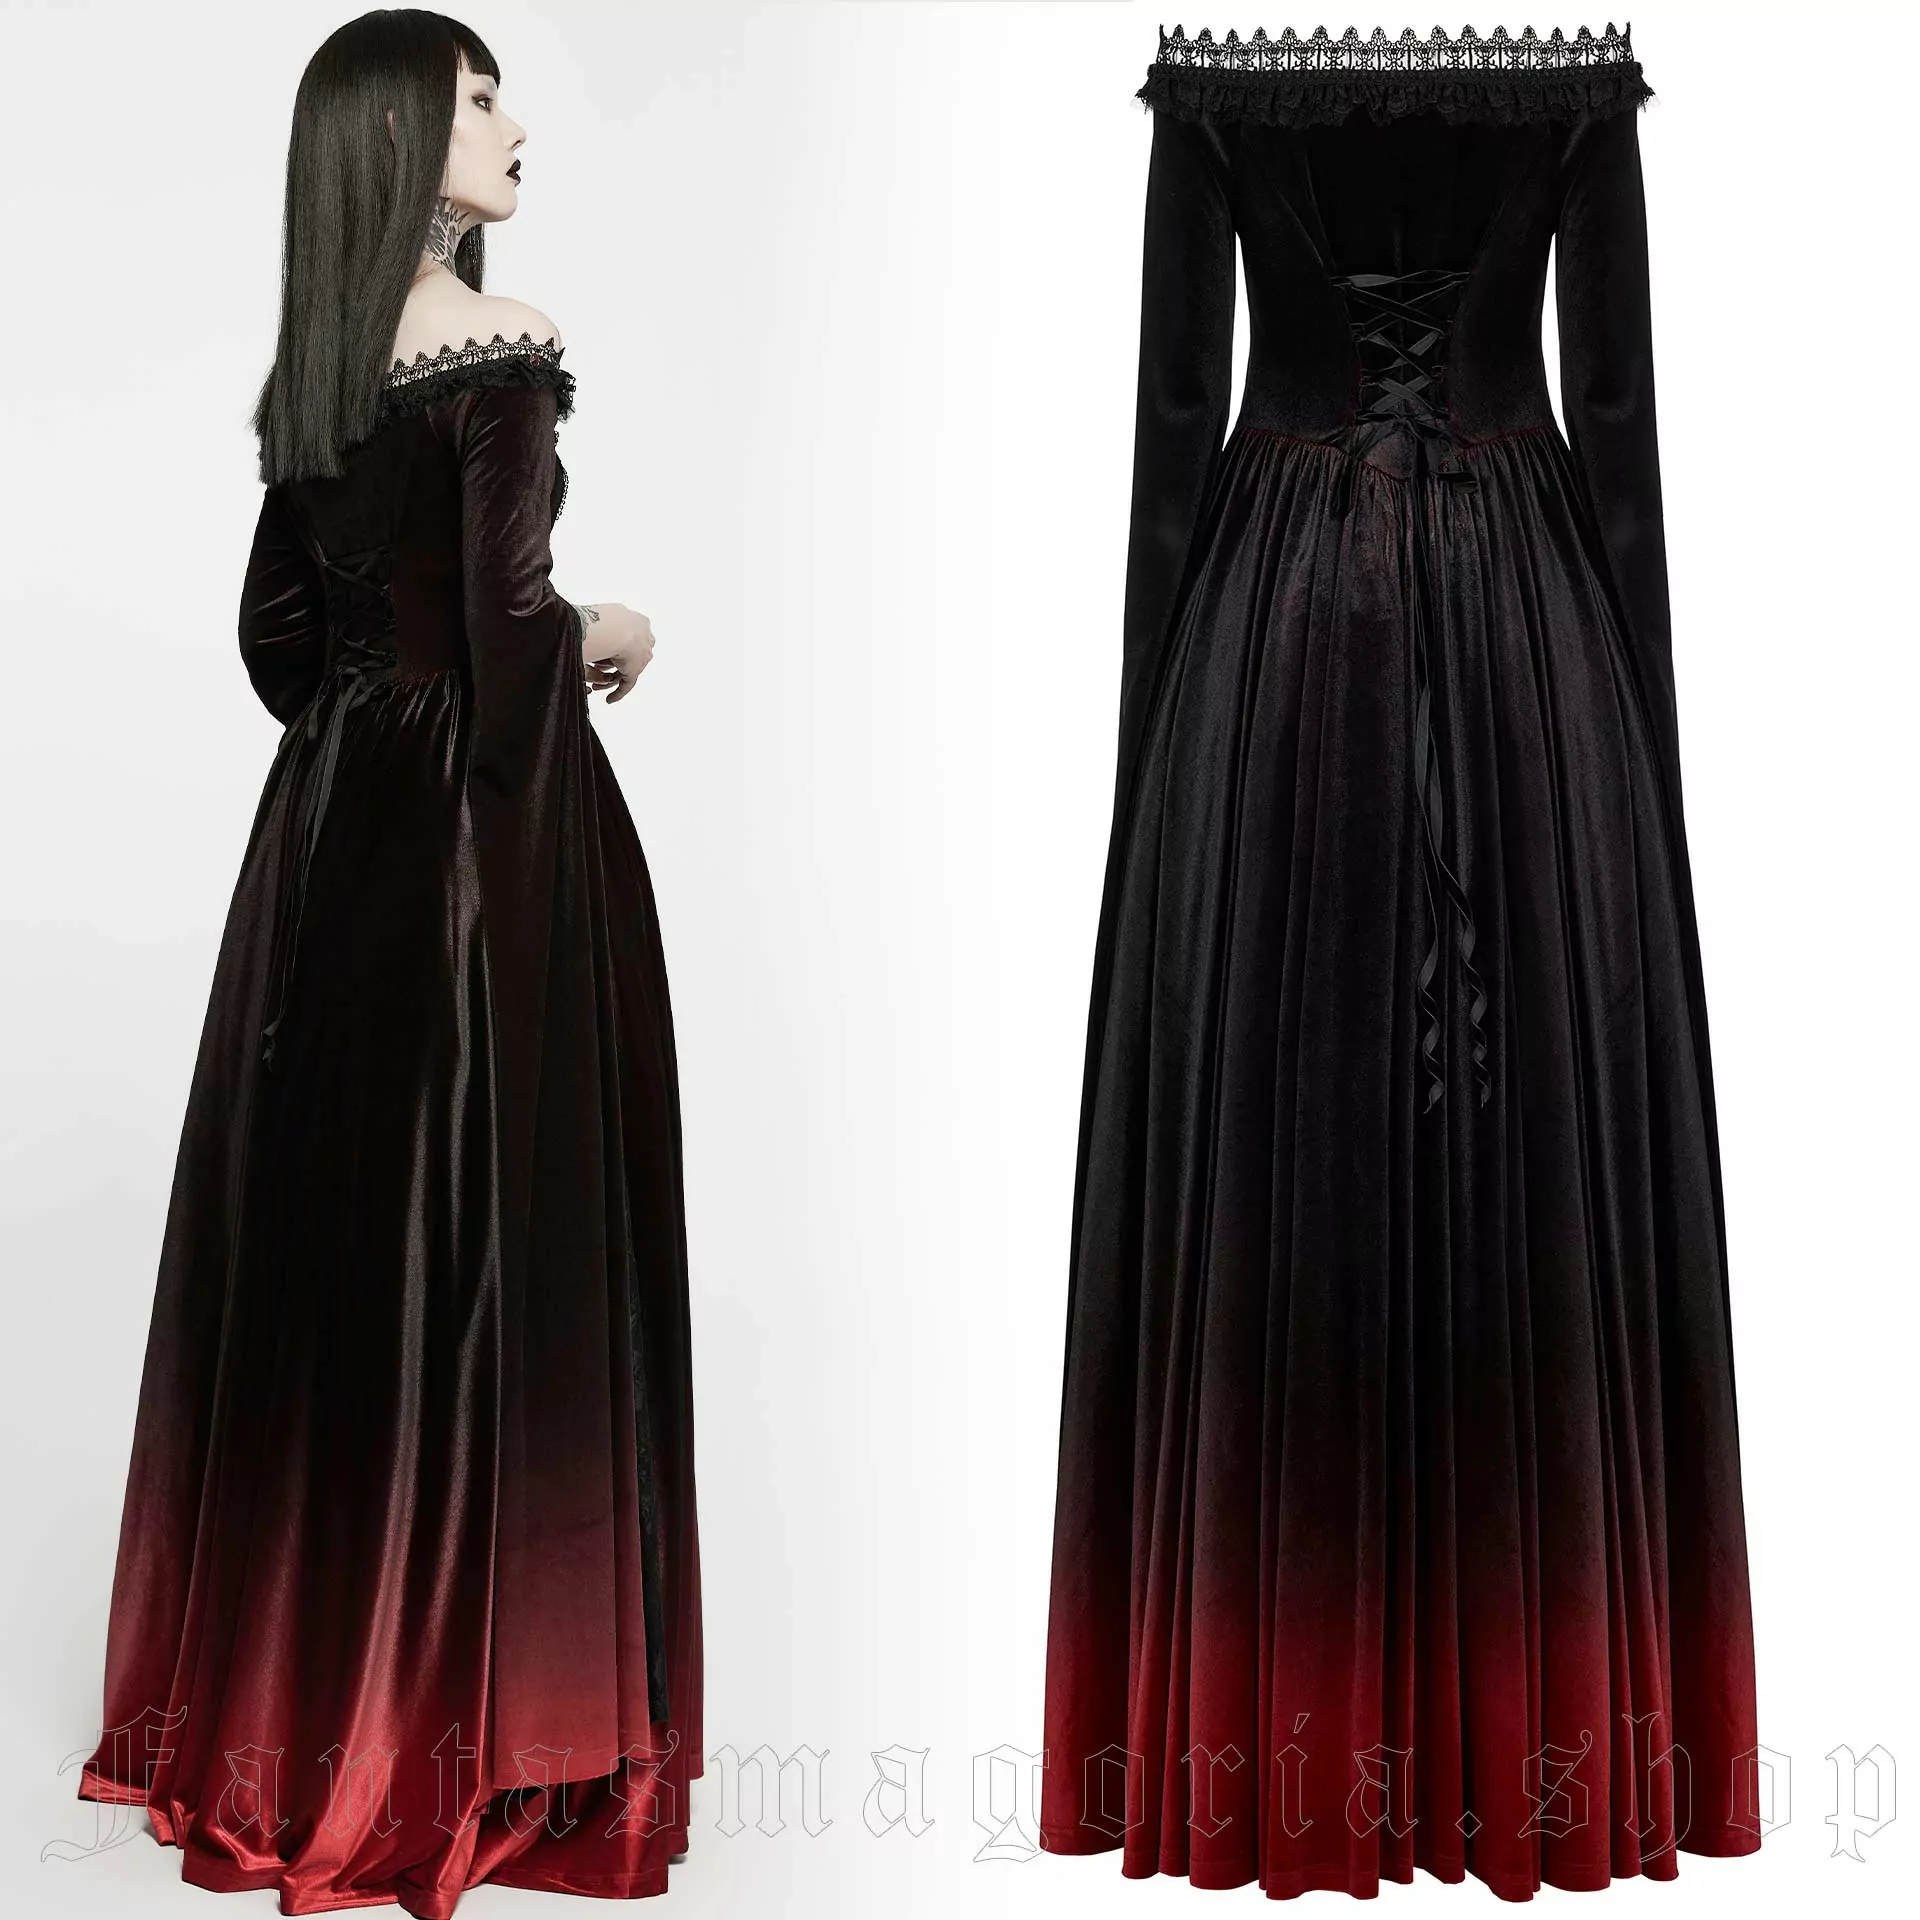 Shop Punk Rave's plus size goth clothes and find great prices here